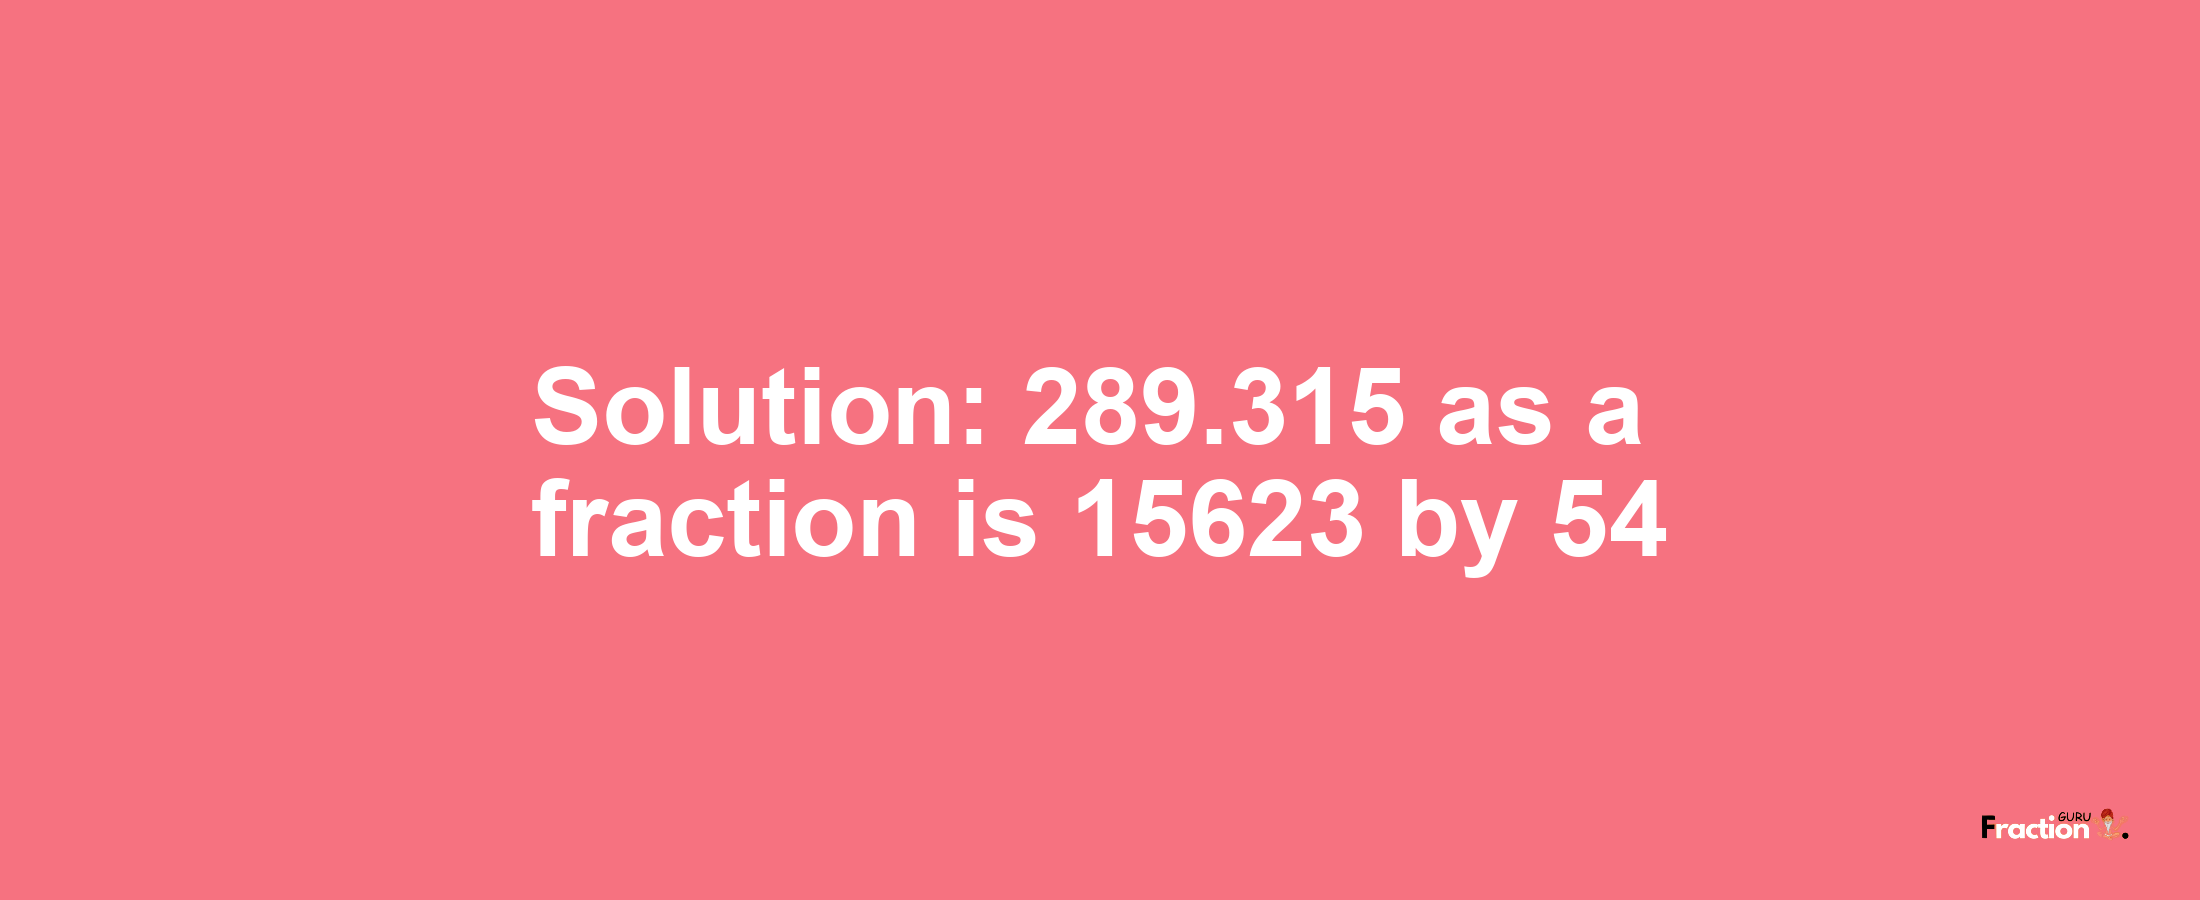 Solution:289.315 as a fraction is 15623/54